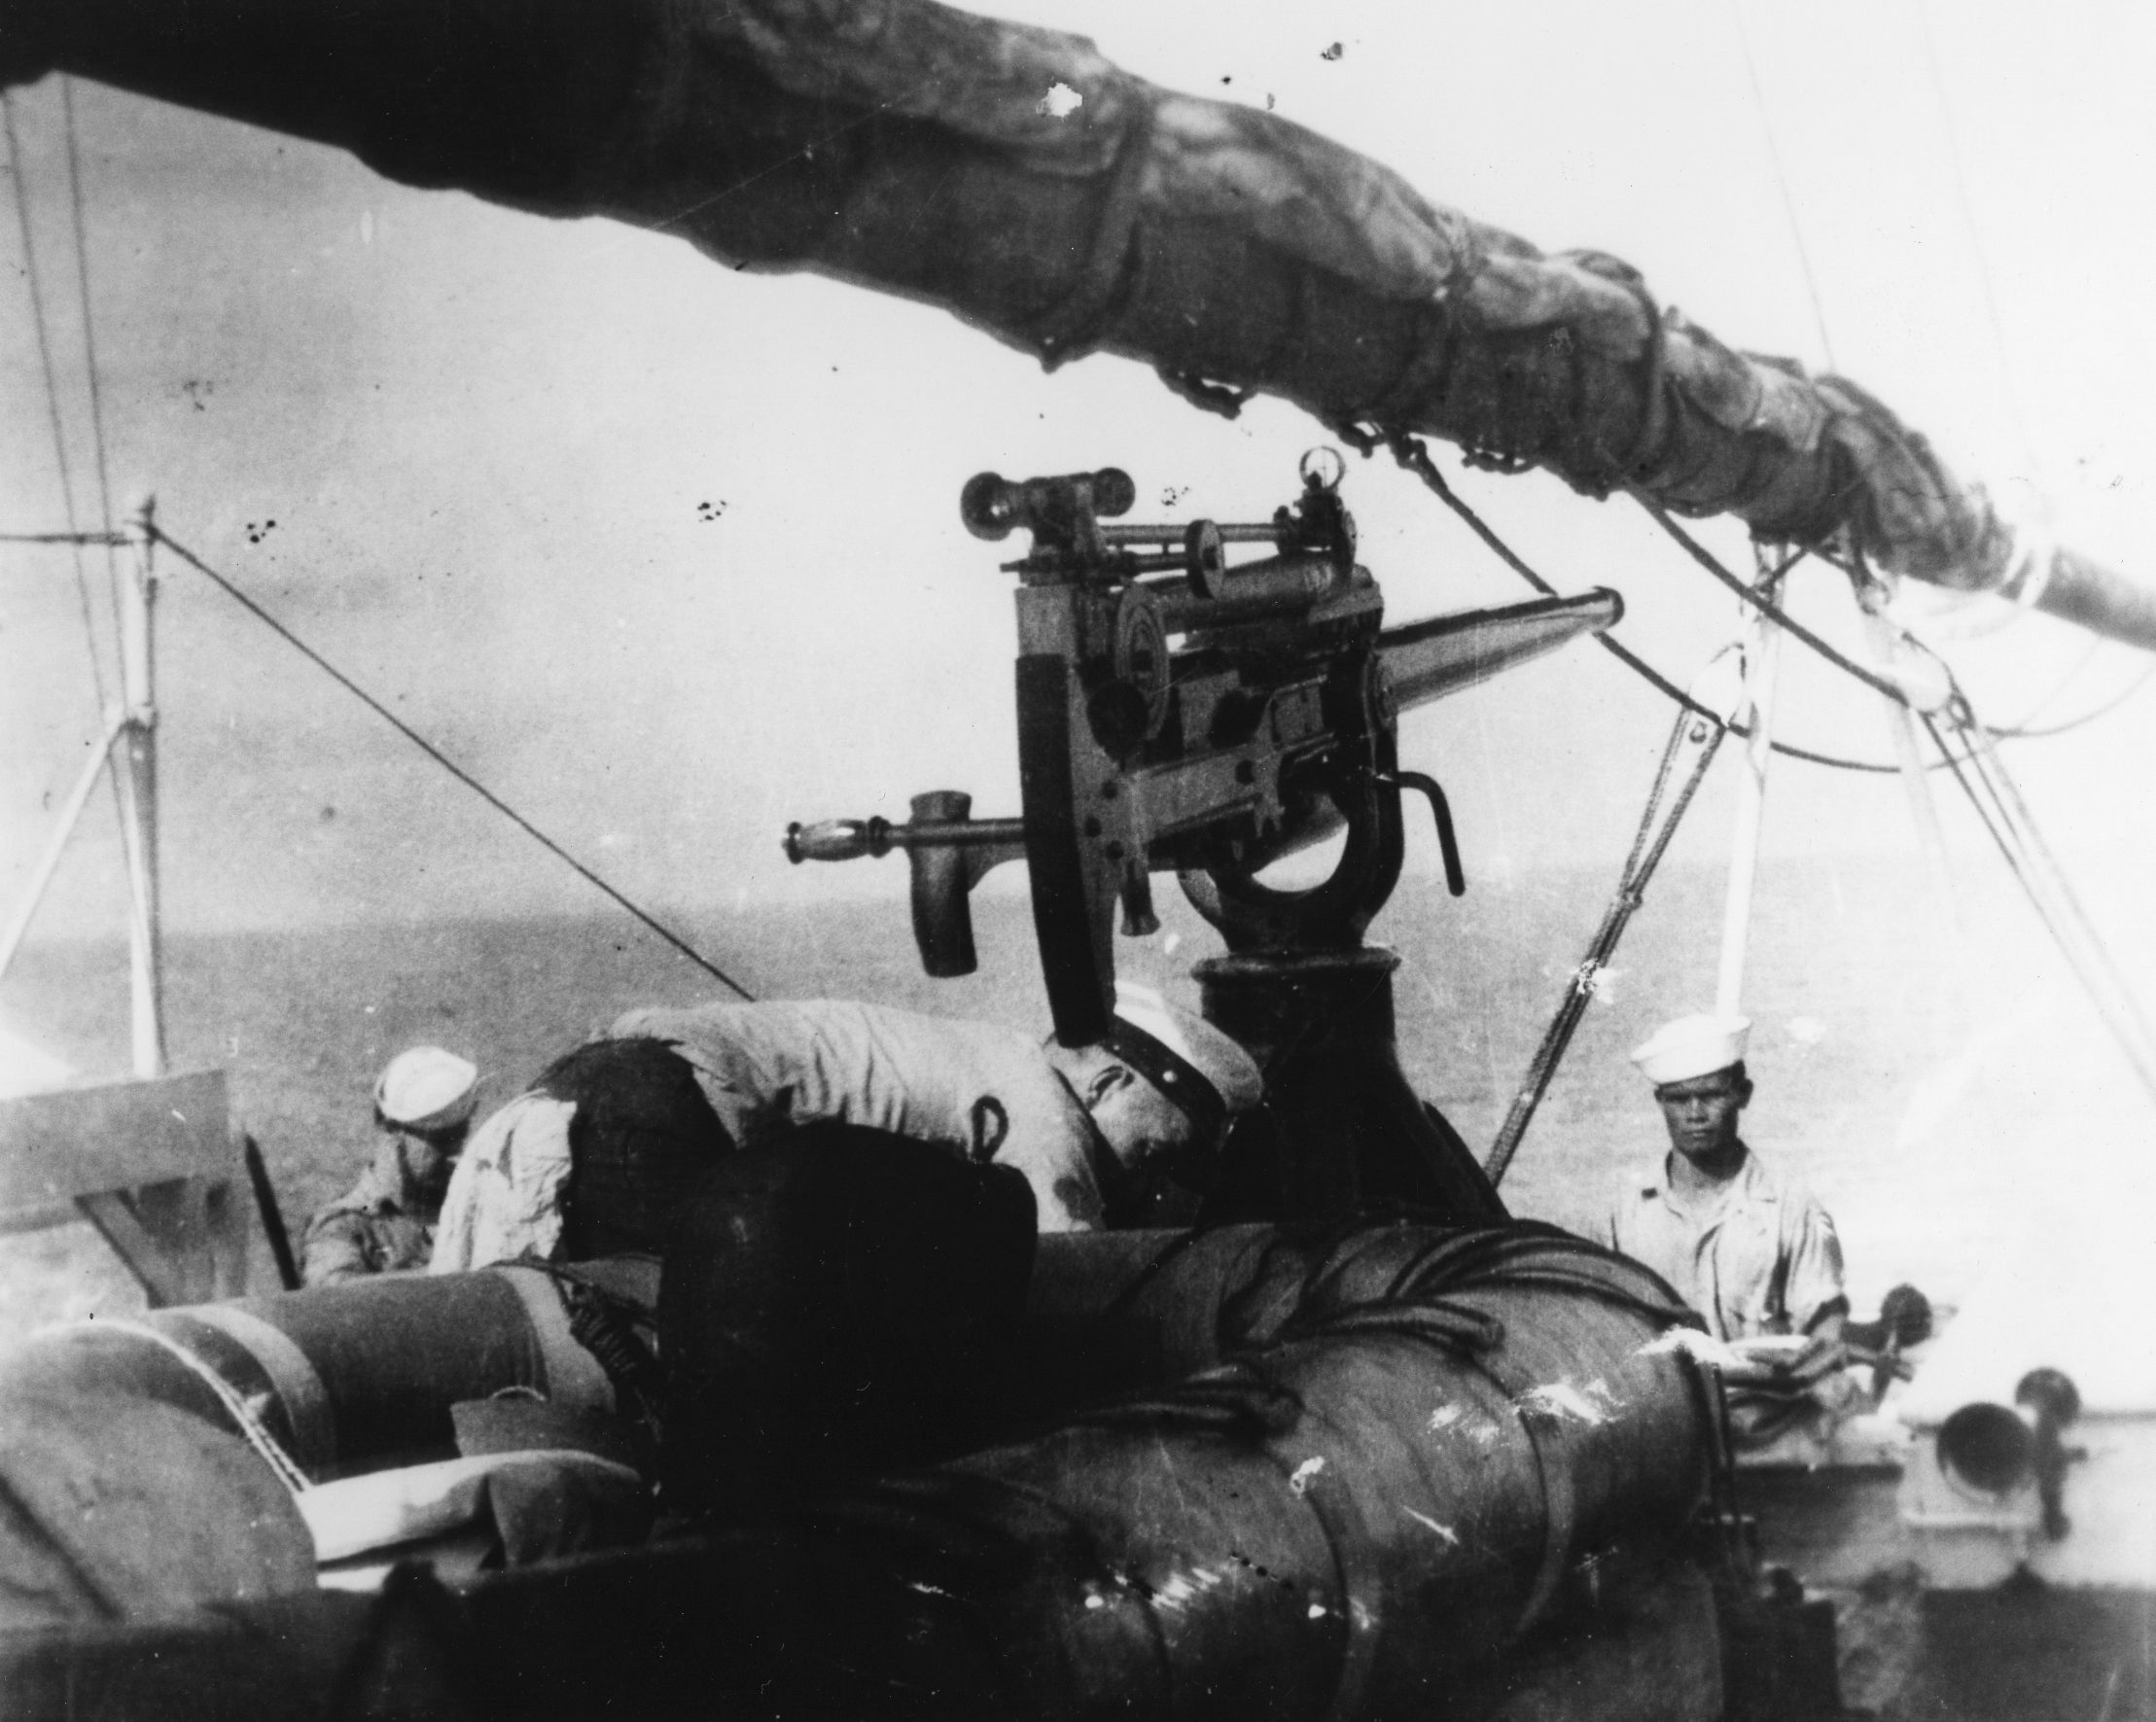 A fast-firing 3-pounder gun of Spanish American War vintage was located and fixed to the deck of the schooner Lanikai.